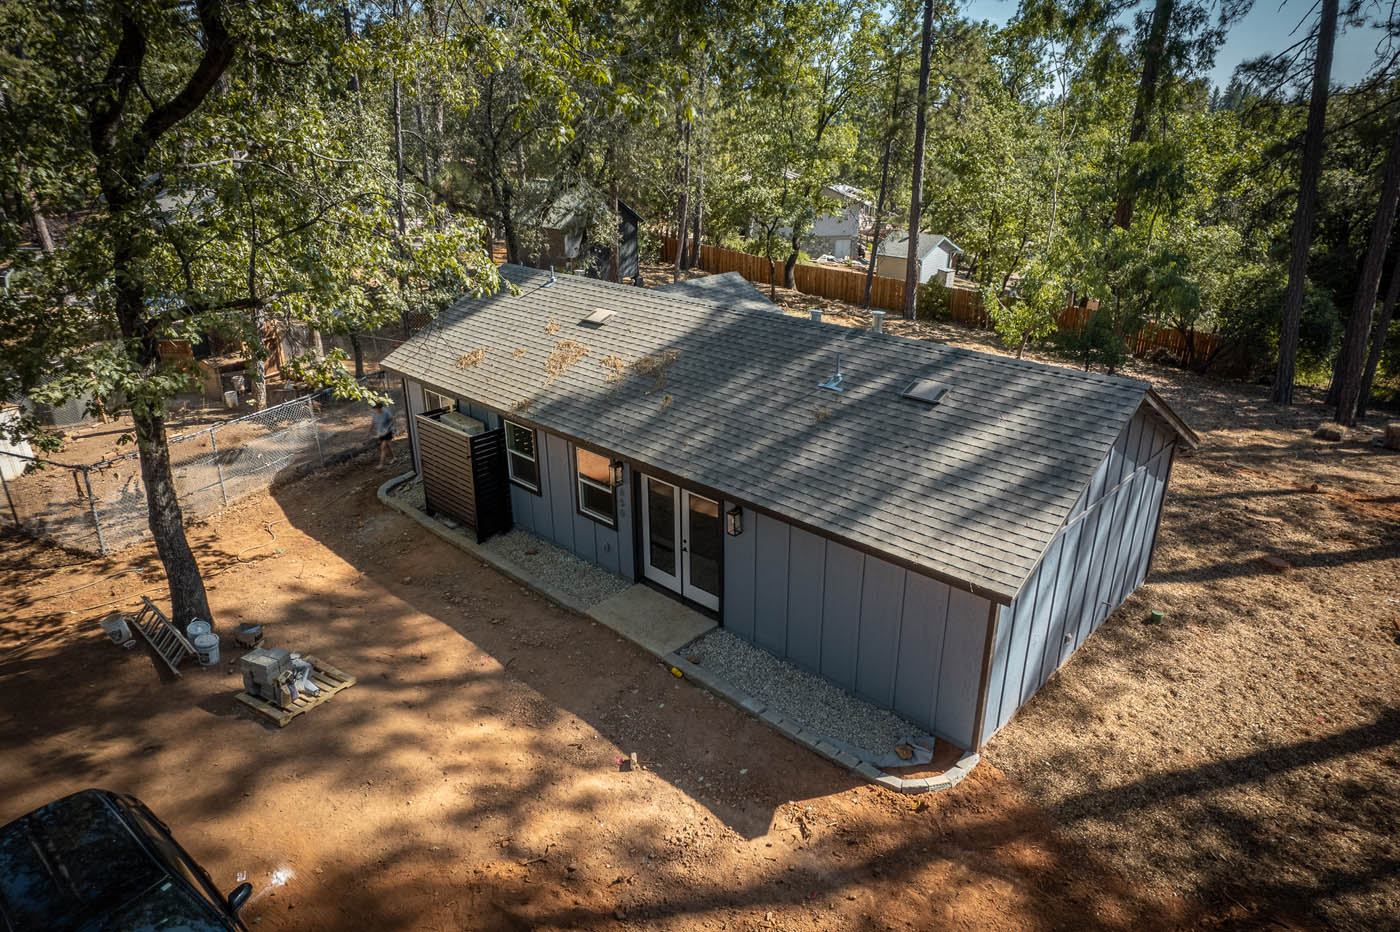 A one bedroom adu model ideal for providing extra rental income - contact Anchored Tiny Homes Jacksonville.